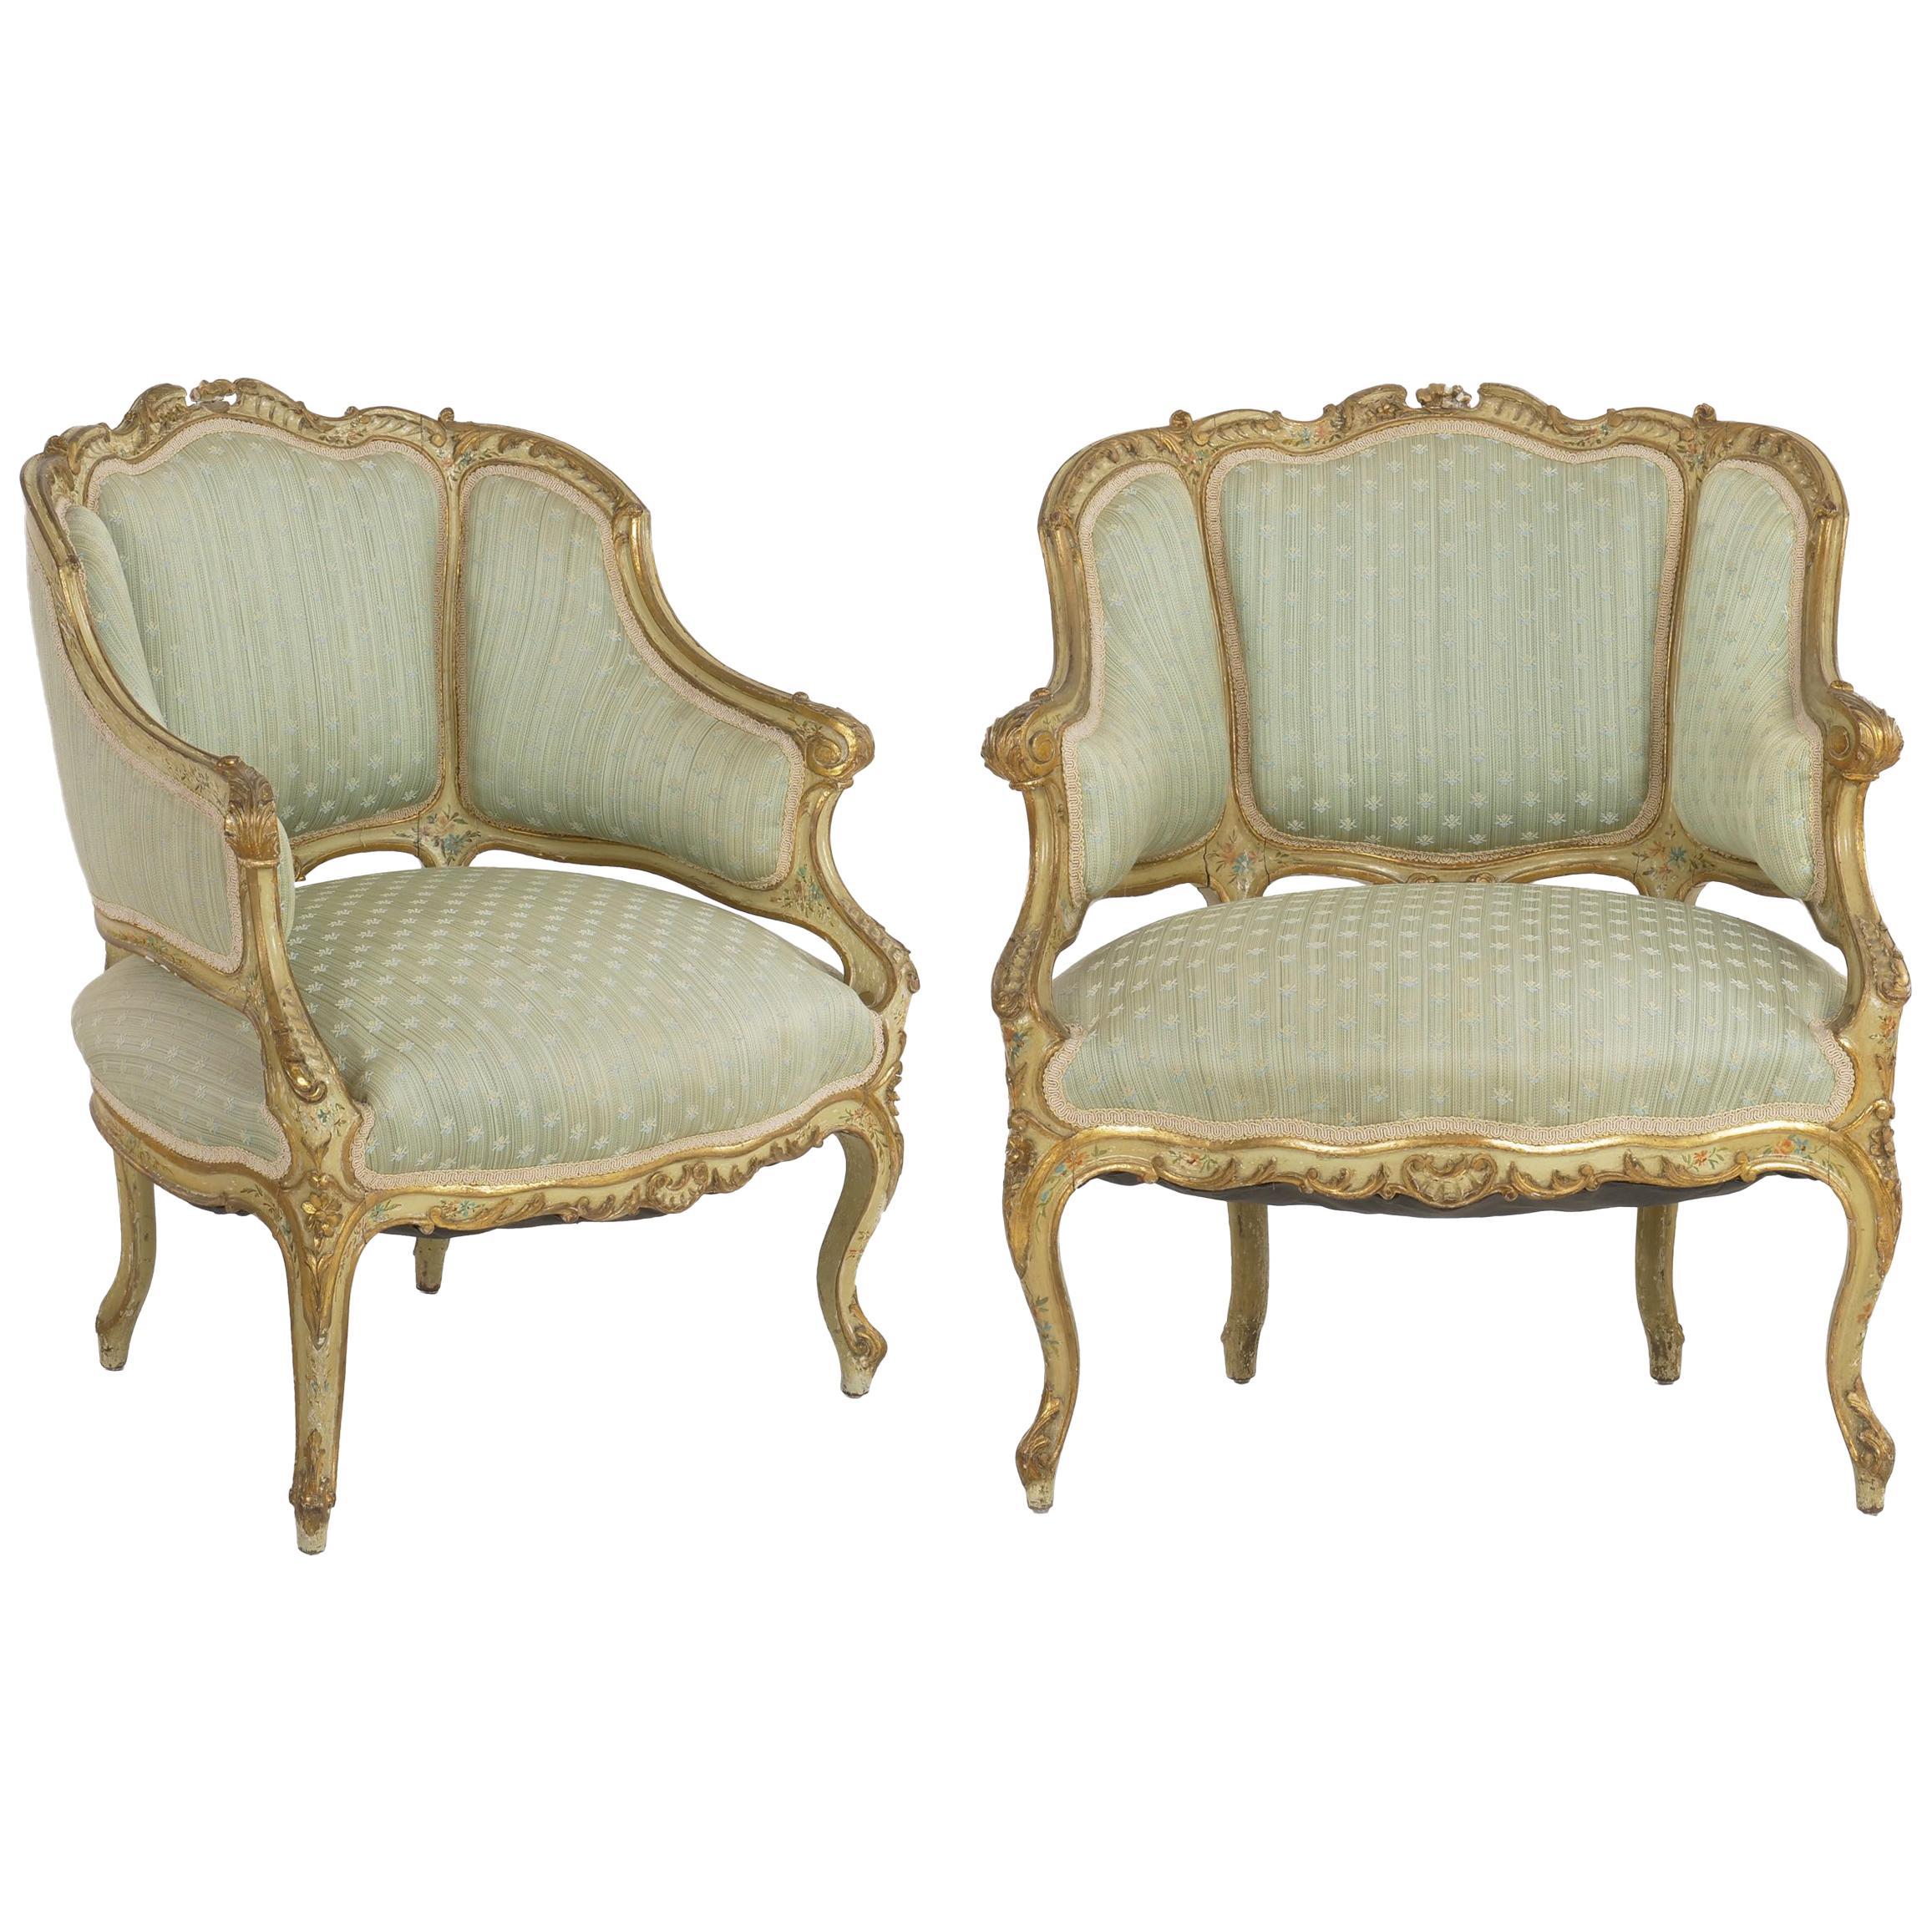 Pair of Venetian Style Carved and Painted Antique Armchairs